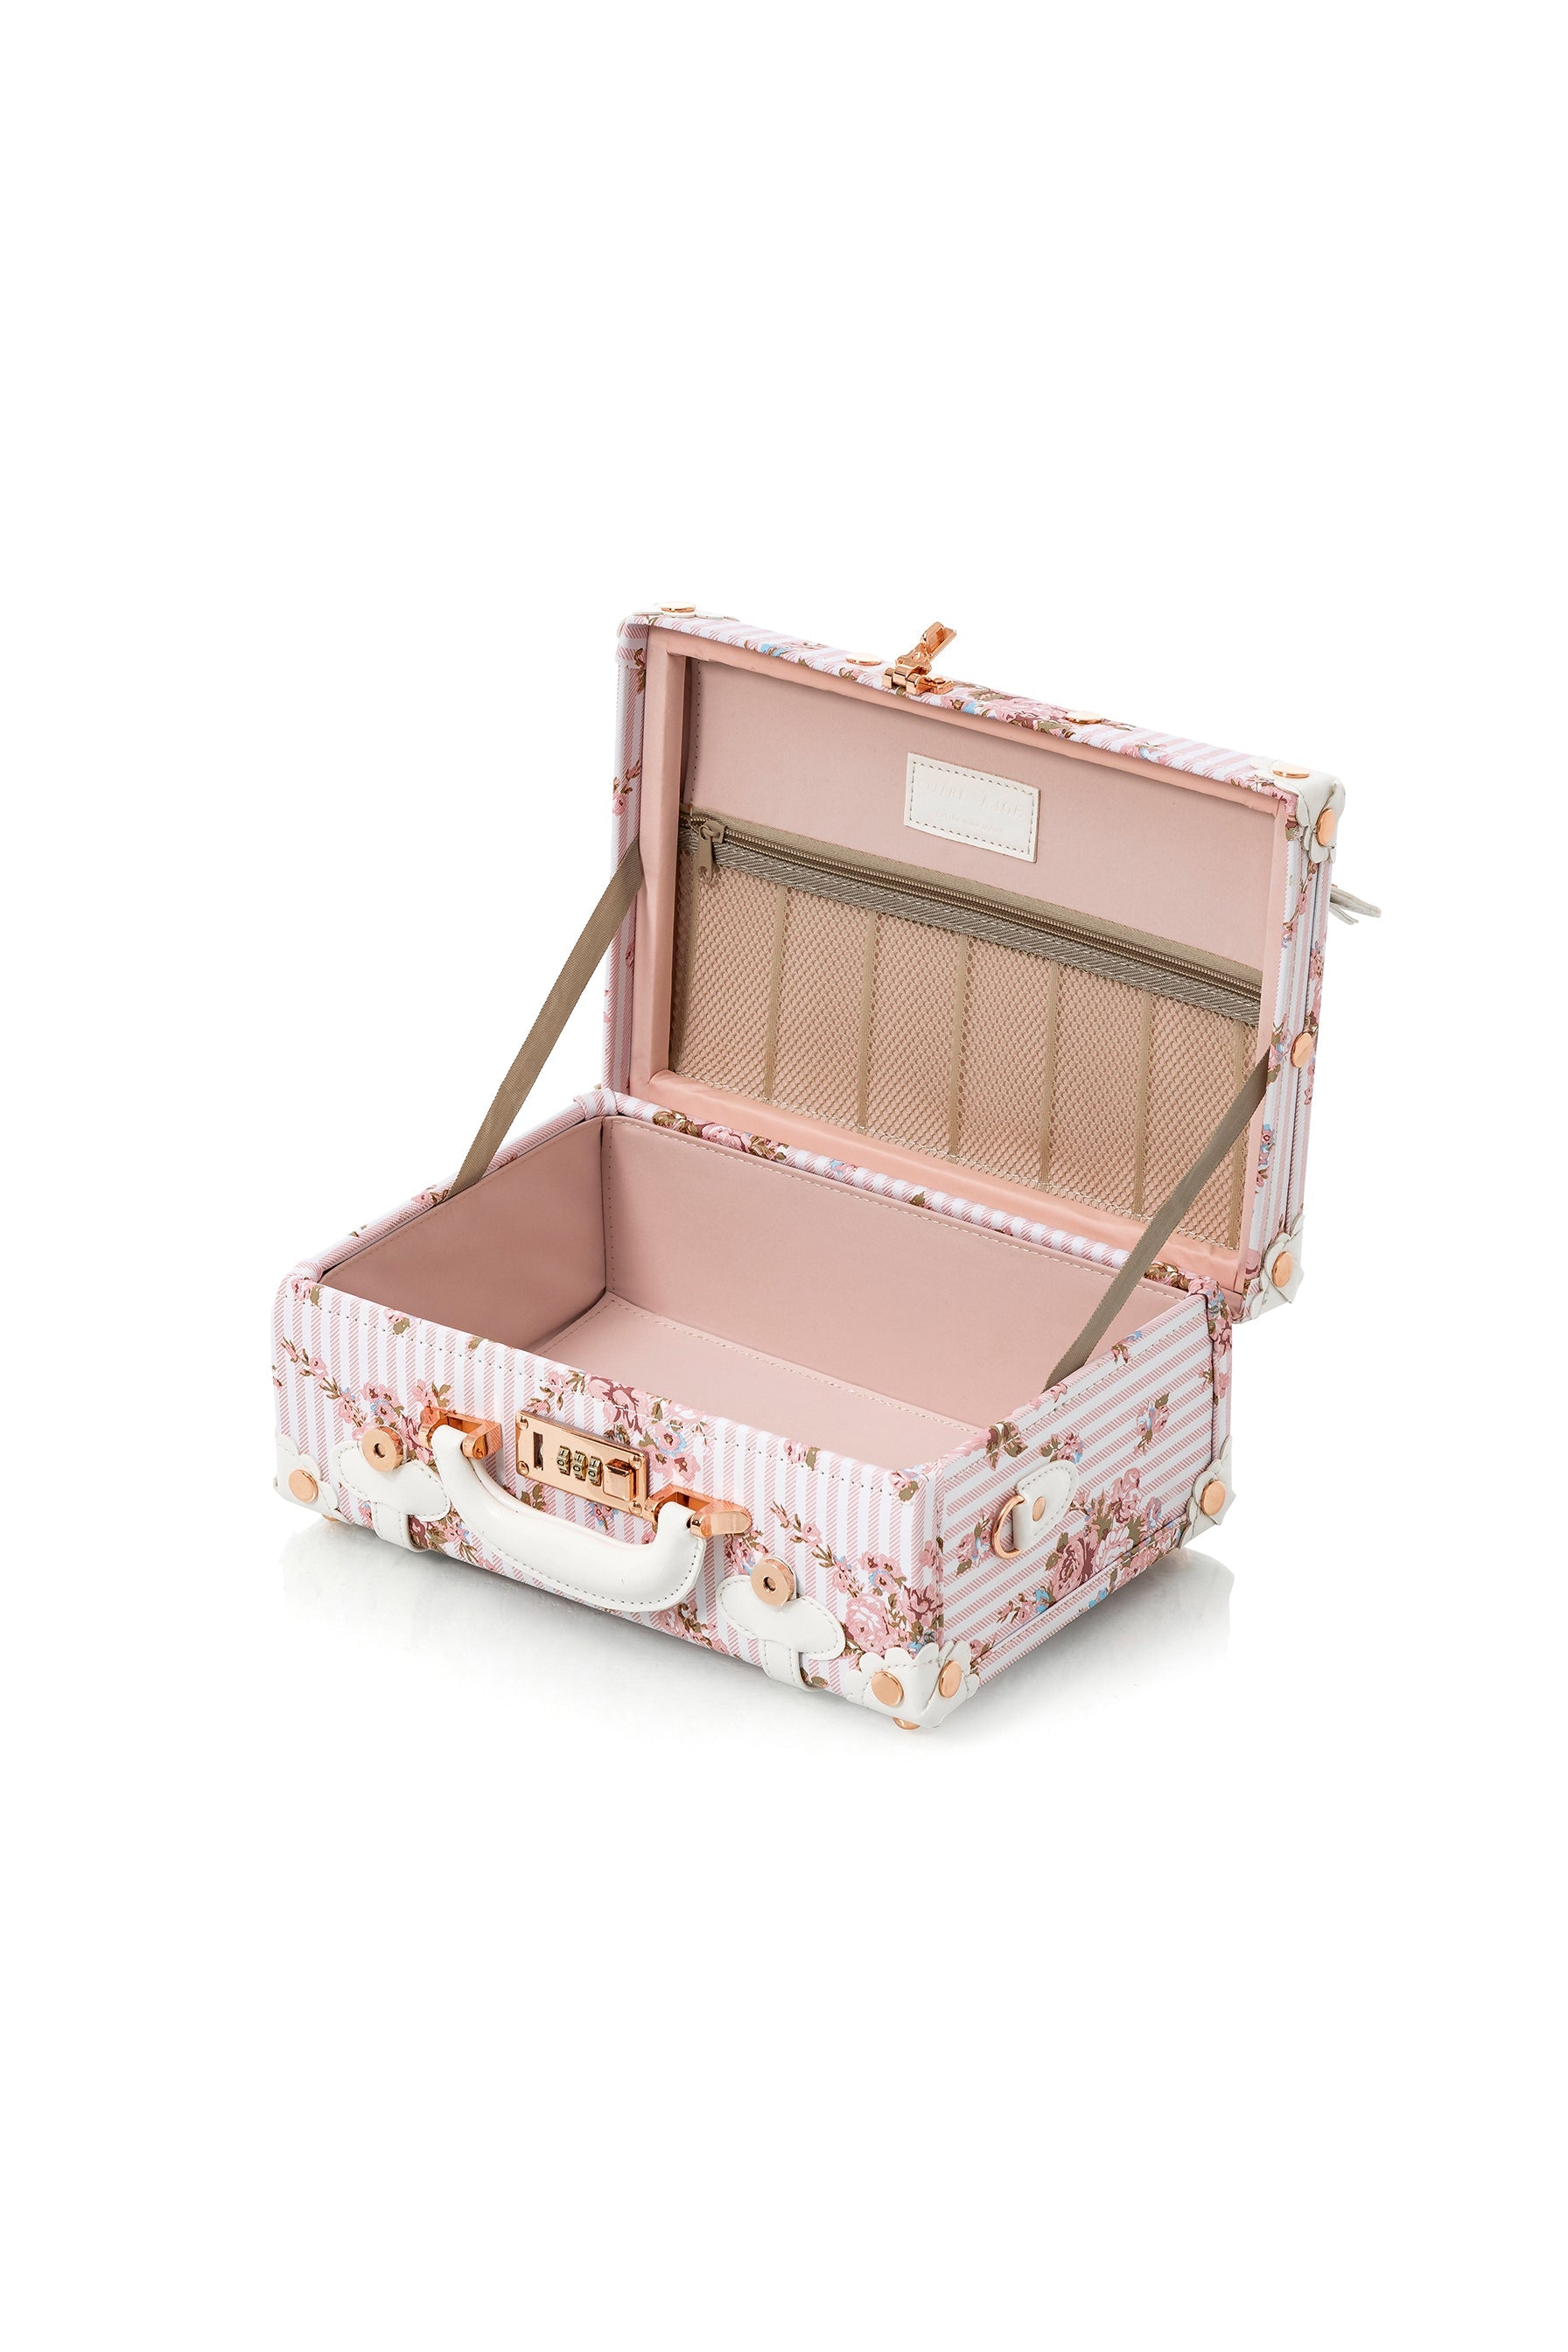 (United States) WildFloral 3 Pieces Luggage Set - Pink Floral's